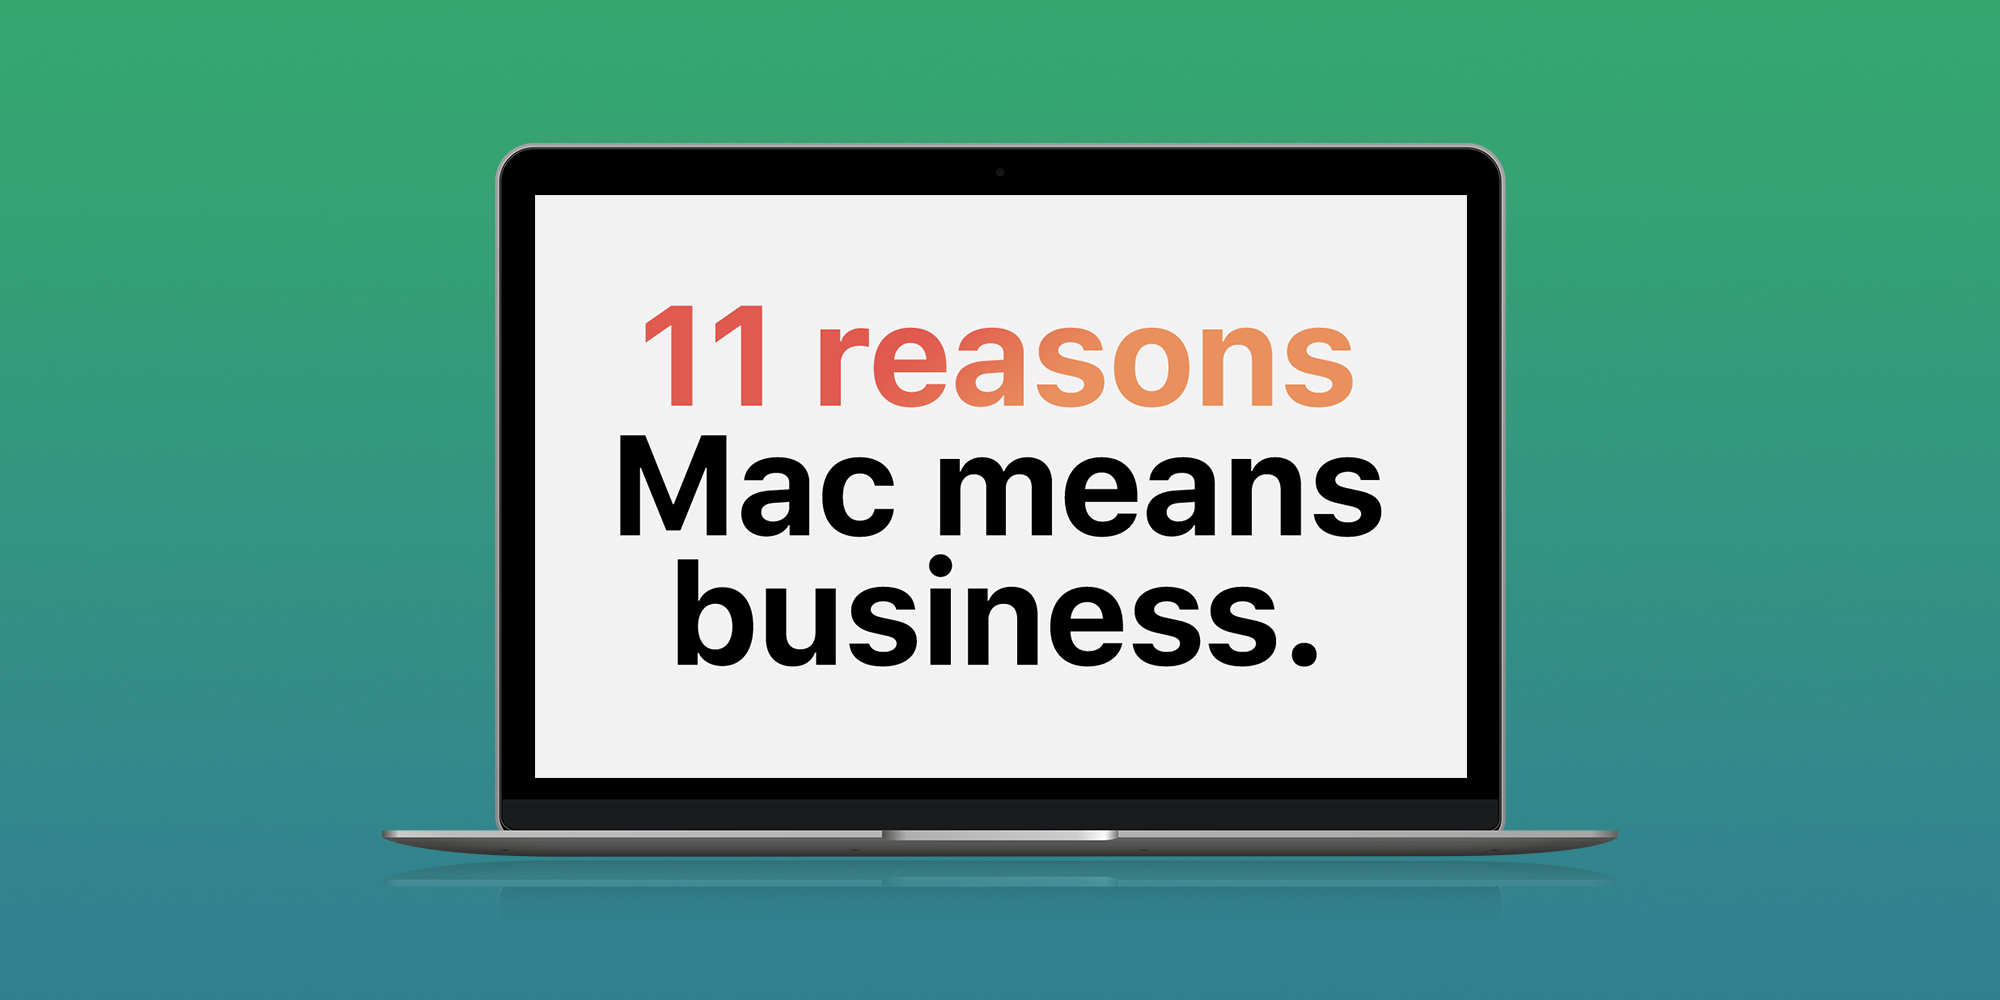 buy apple mac for business